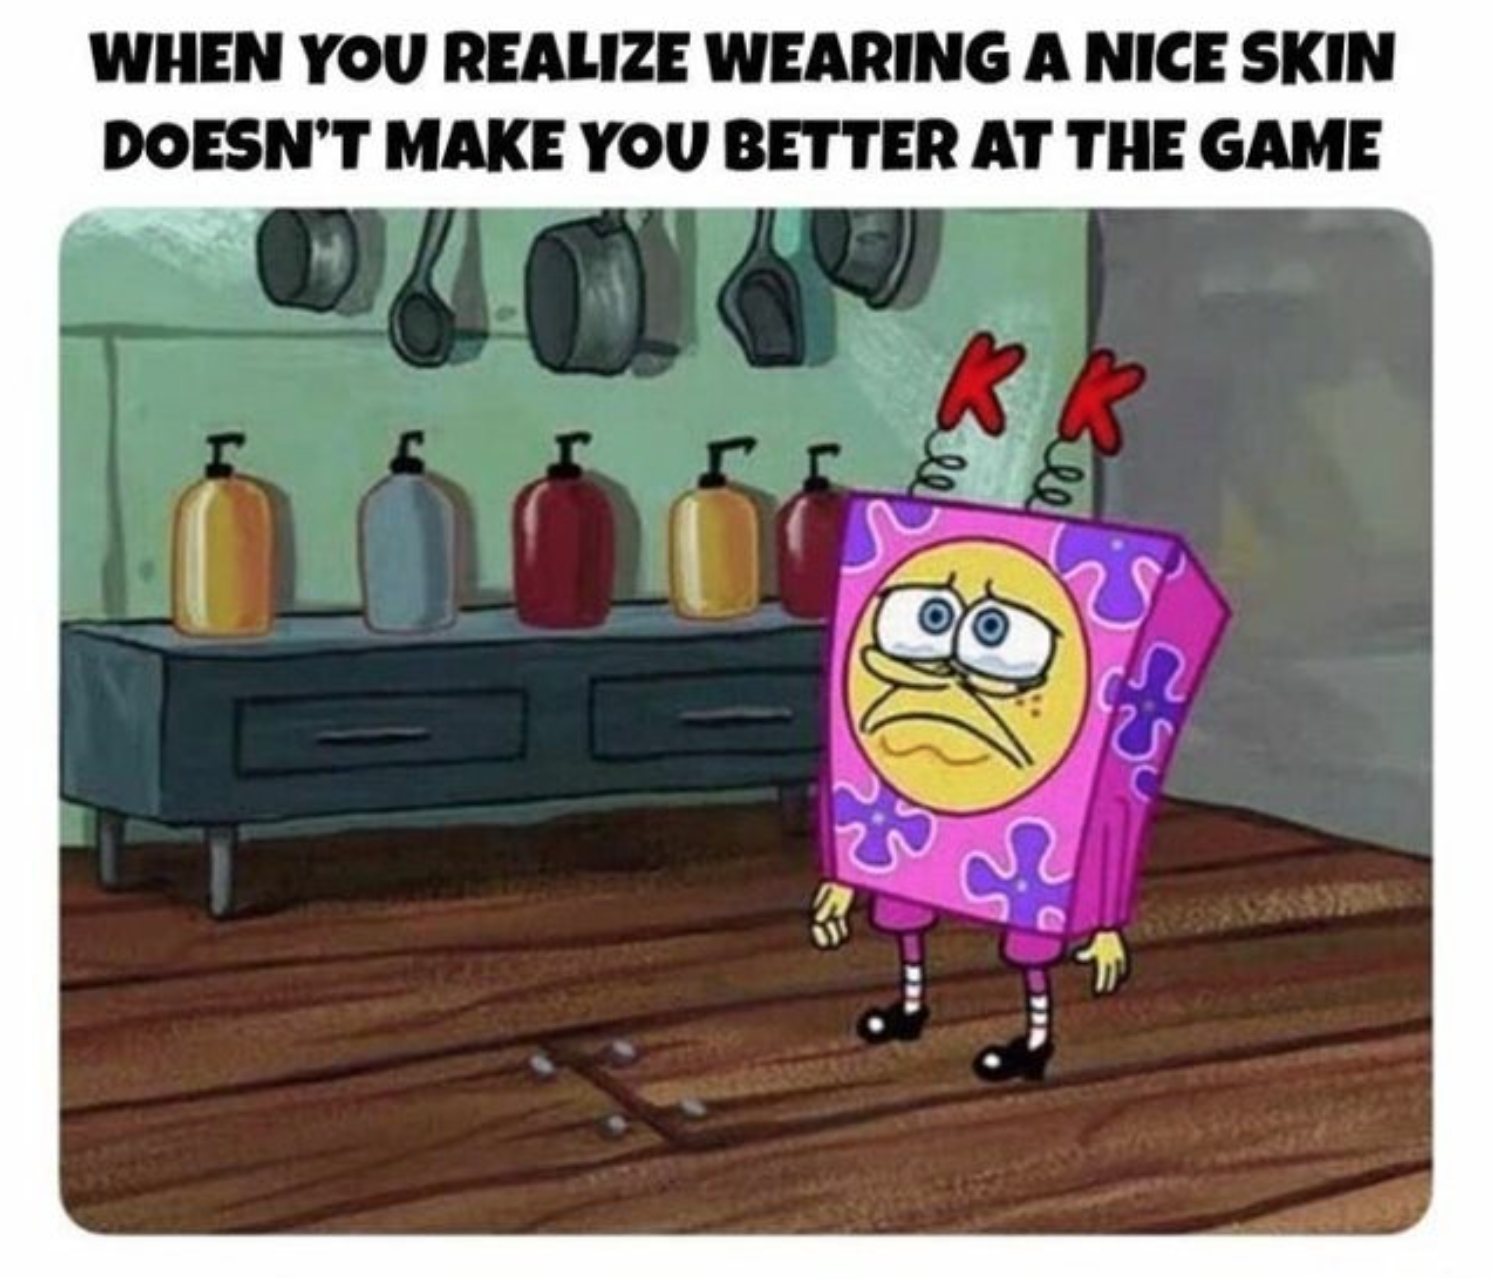 funny gaming memes  - gaming memes - When You Realize Wearing A Nice Skin Doesn'T Make You Better At The Game Kk 0 3